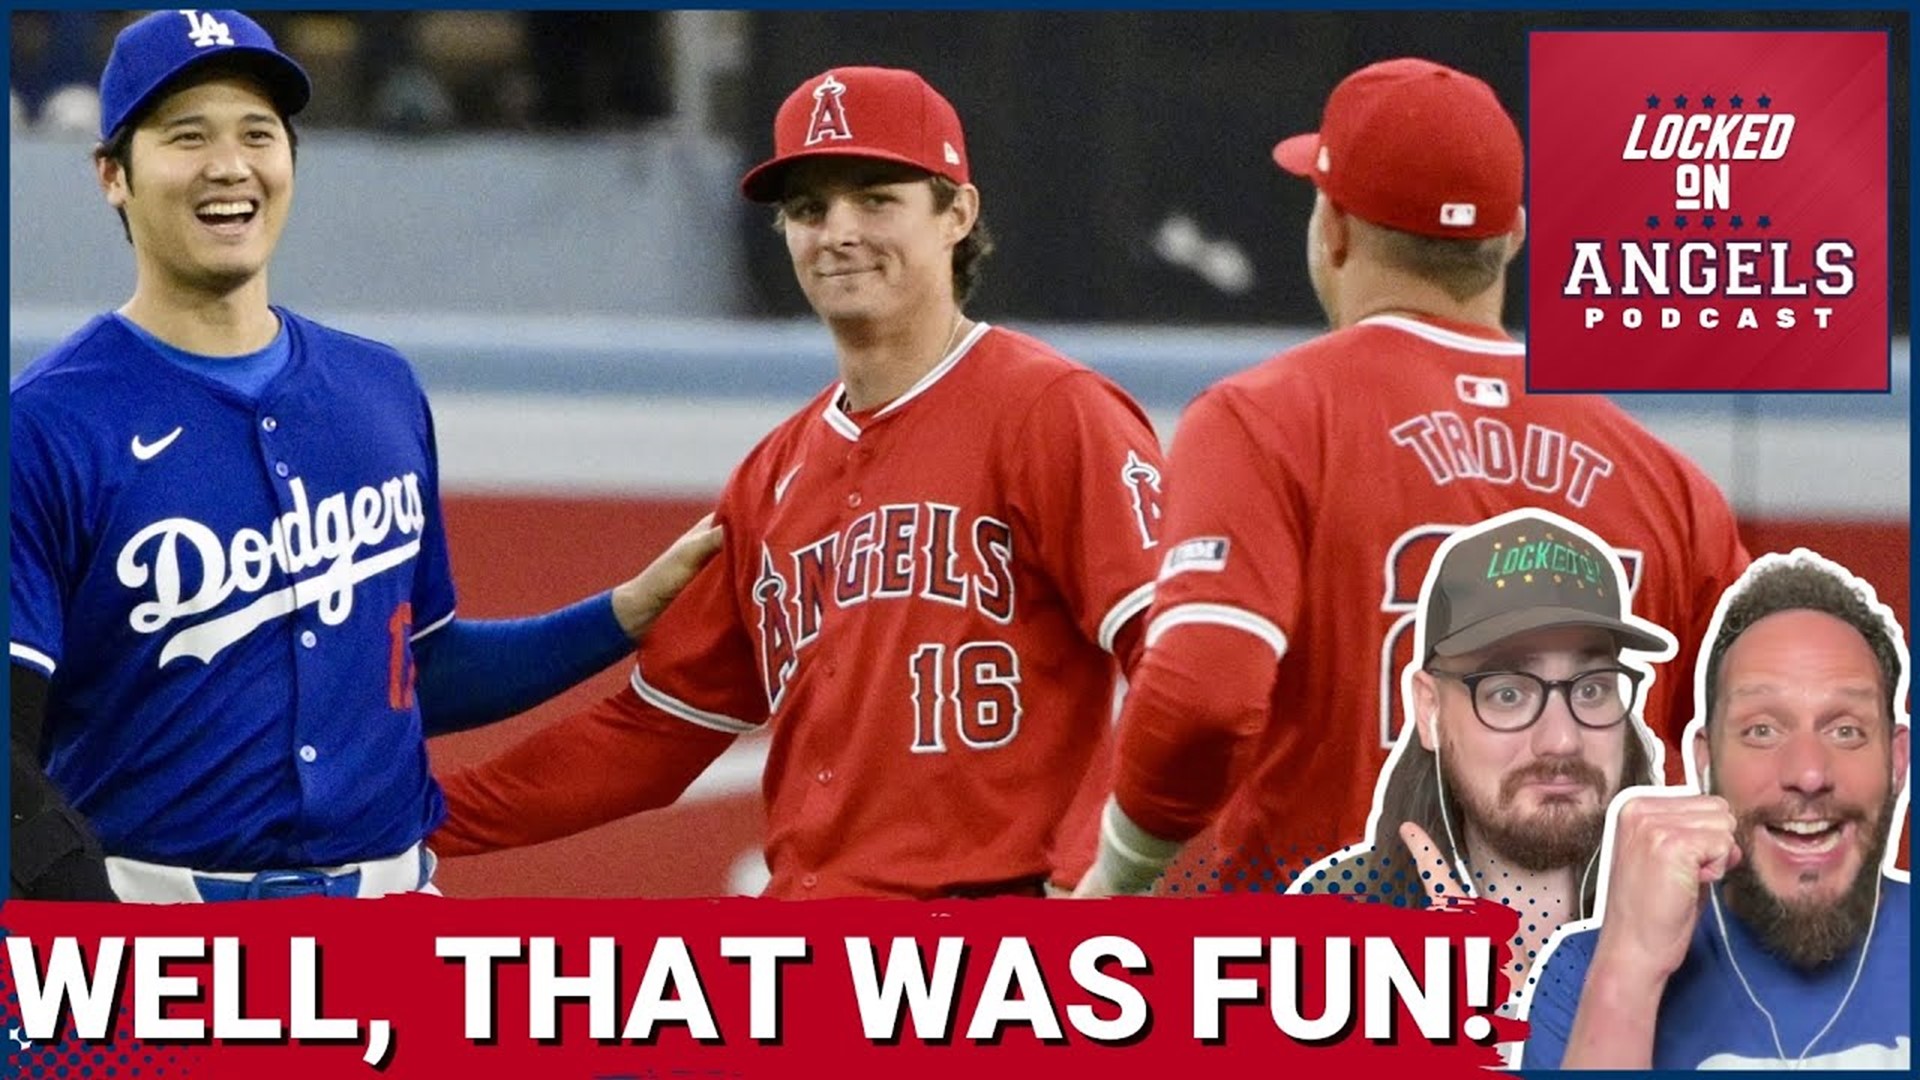 The Los Angeles Angels took a shutout victory over the Dodgers in game 2 of the exhibition Freeway Series, as Reid Detmers pitched 5 scoreless